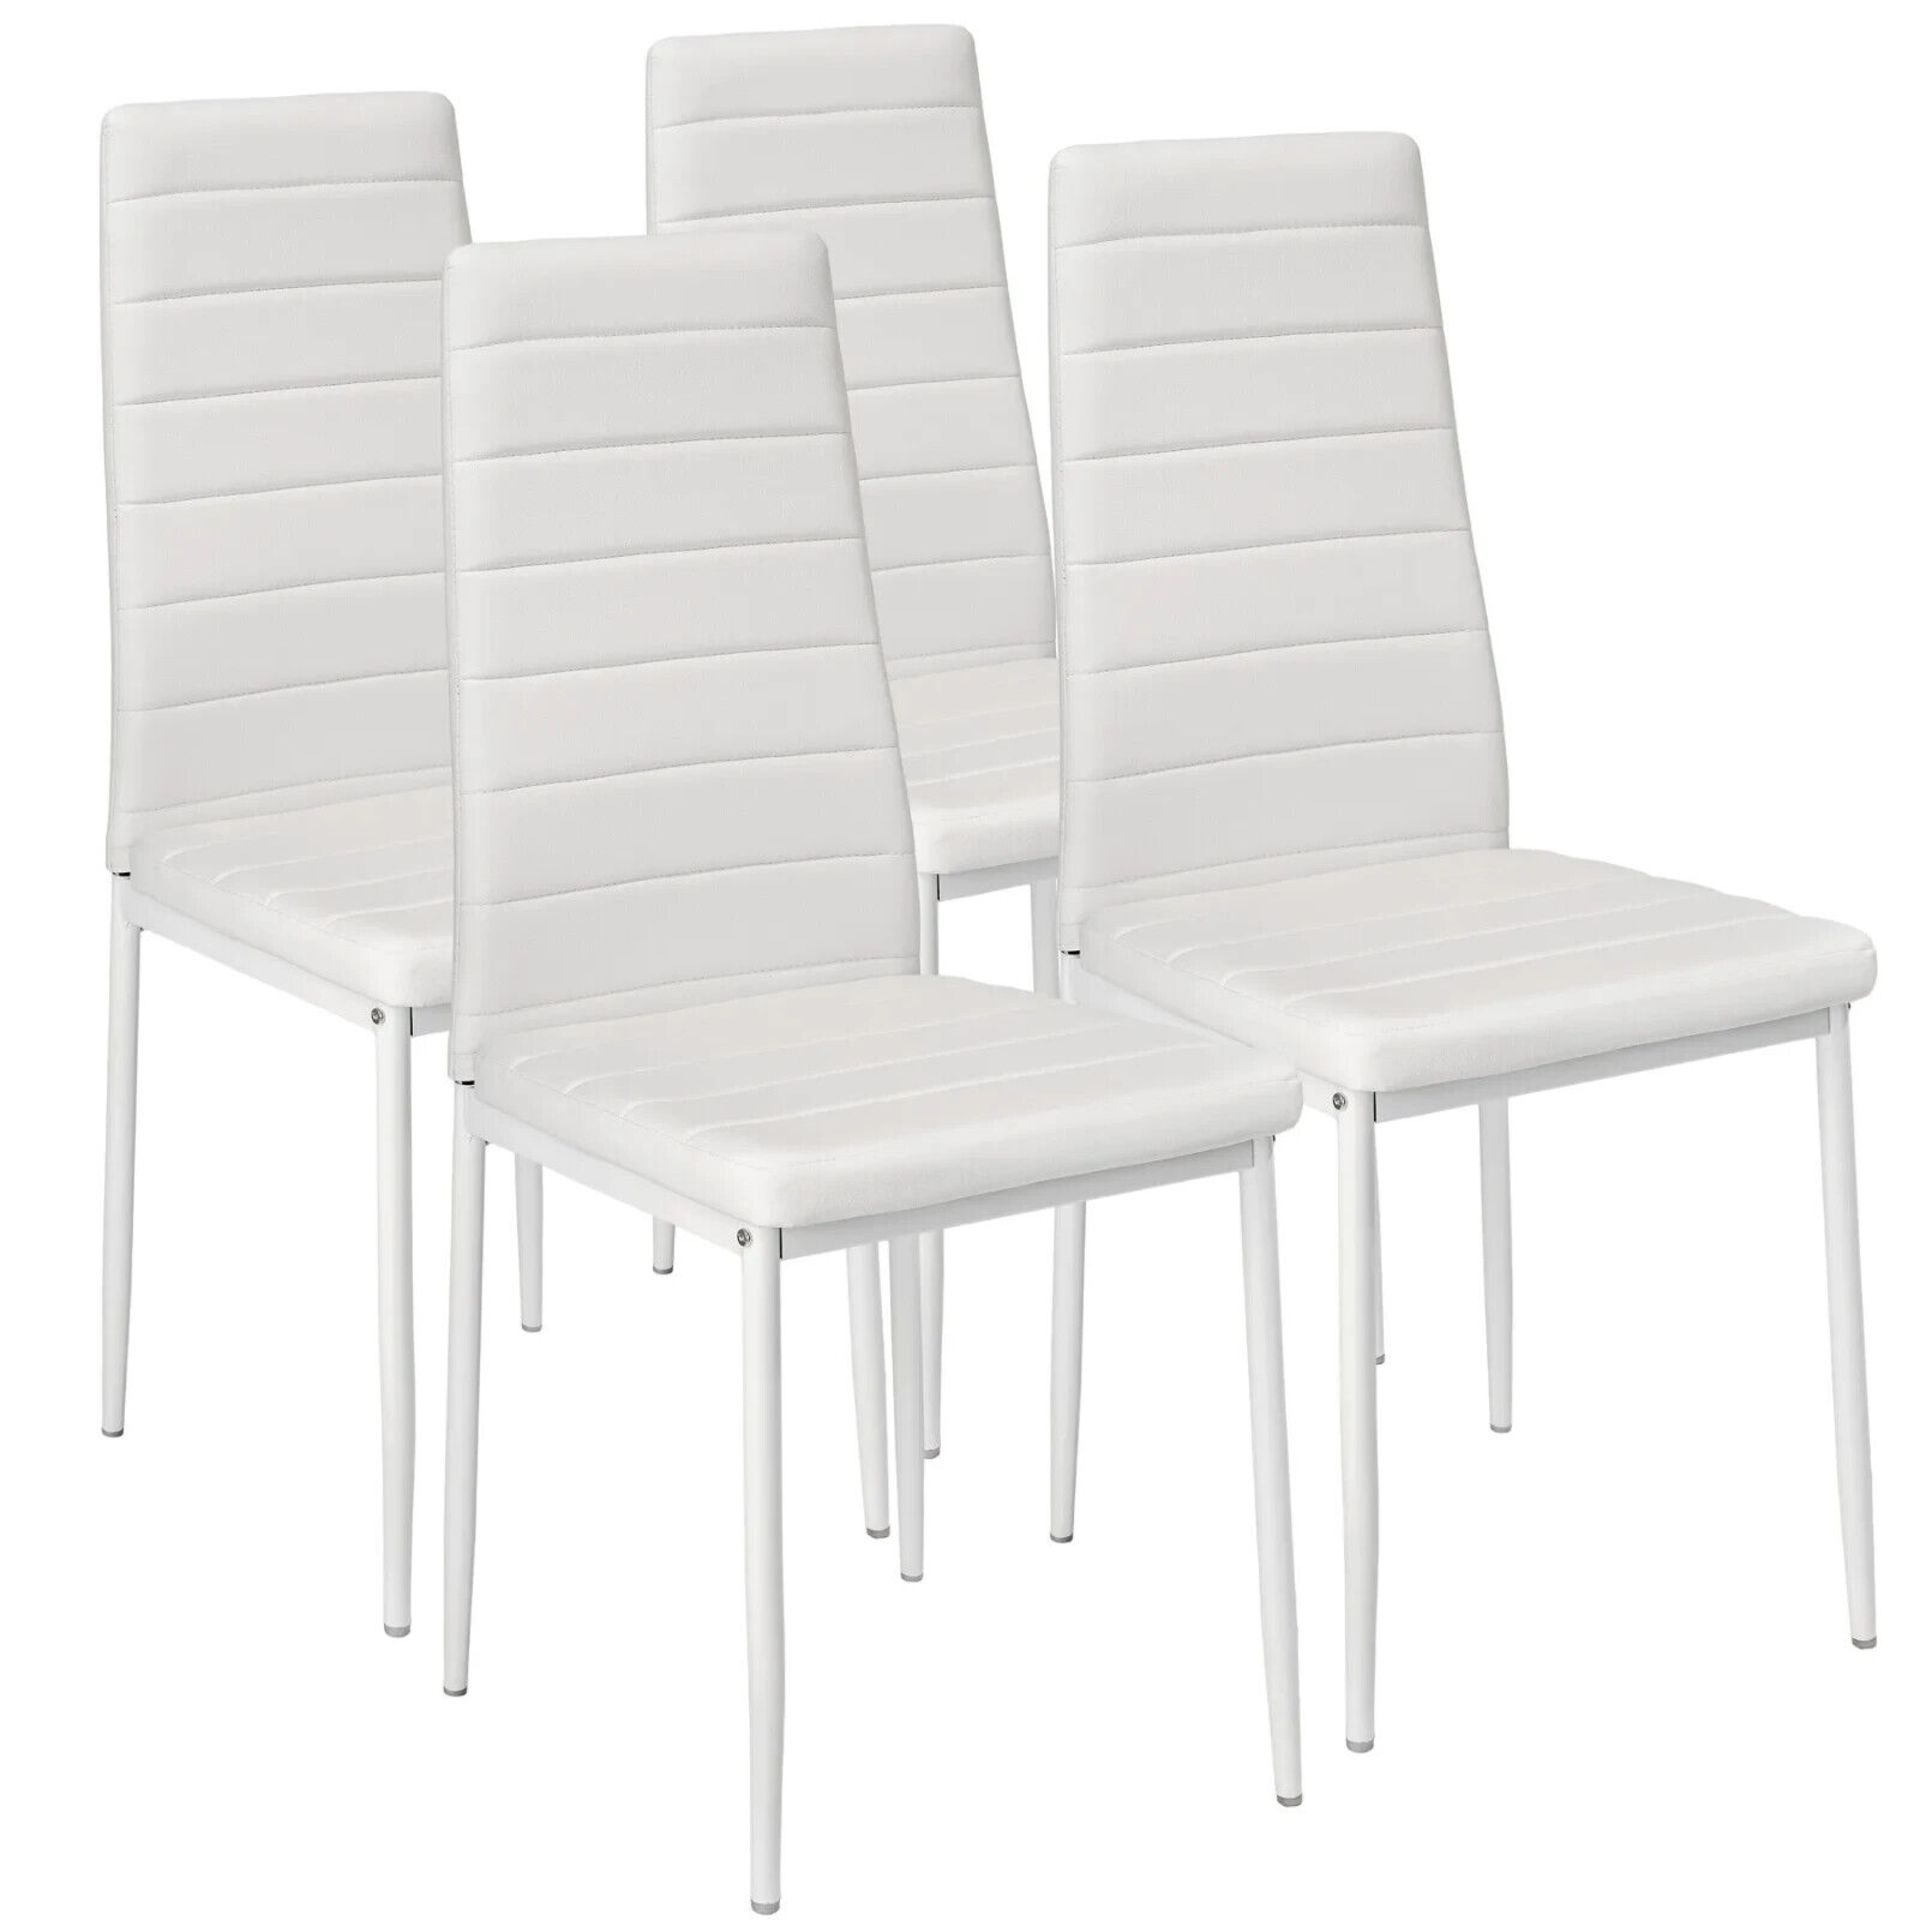 3 SETS OF 4 MODERN WHITE PU LEATHER DINING CHAIRS HIGH WHITE METAL LEGS PADDED SEAT RRP £299.97 - Image 3 of 3